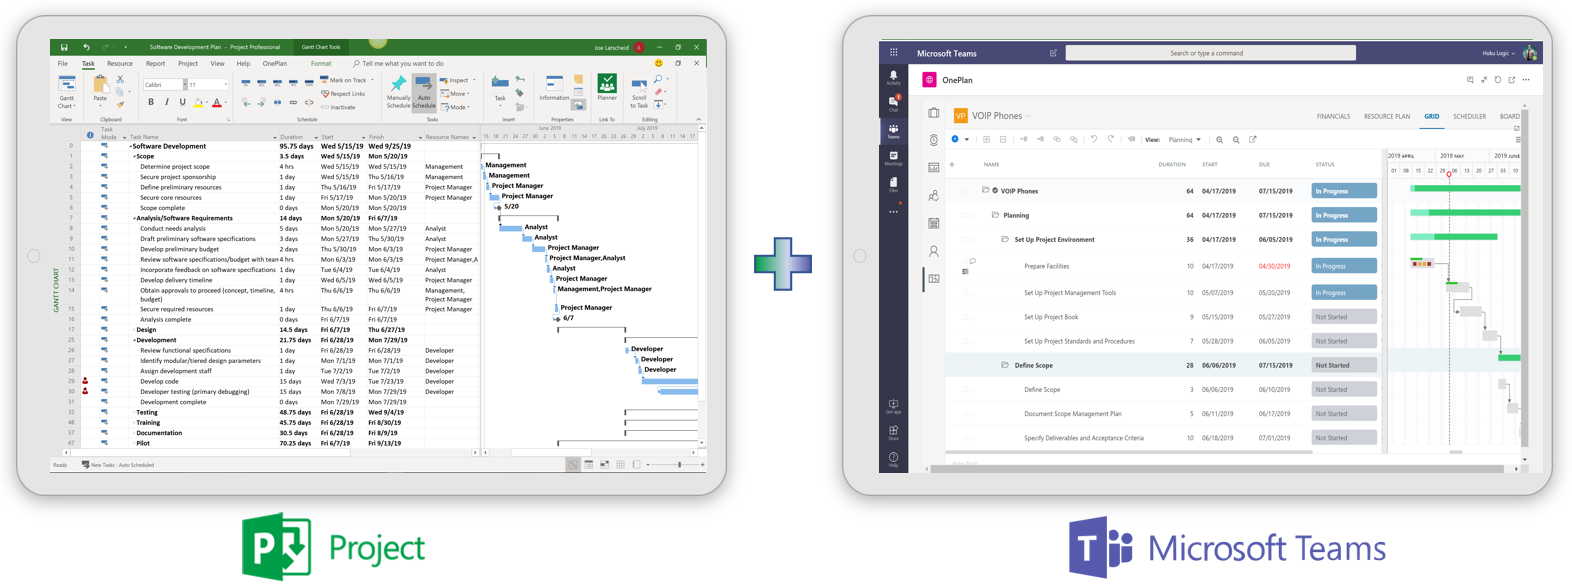 MIcrosoft_Project_and_Microsoft_Teams.png